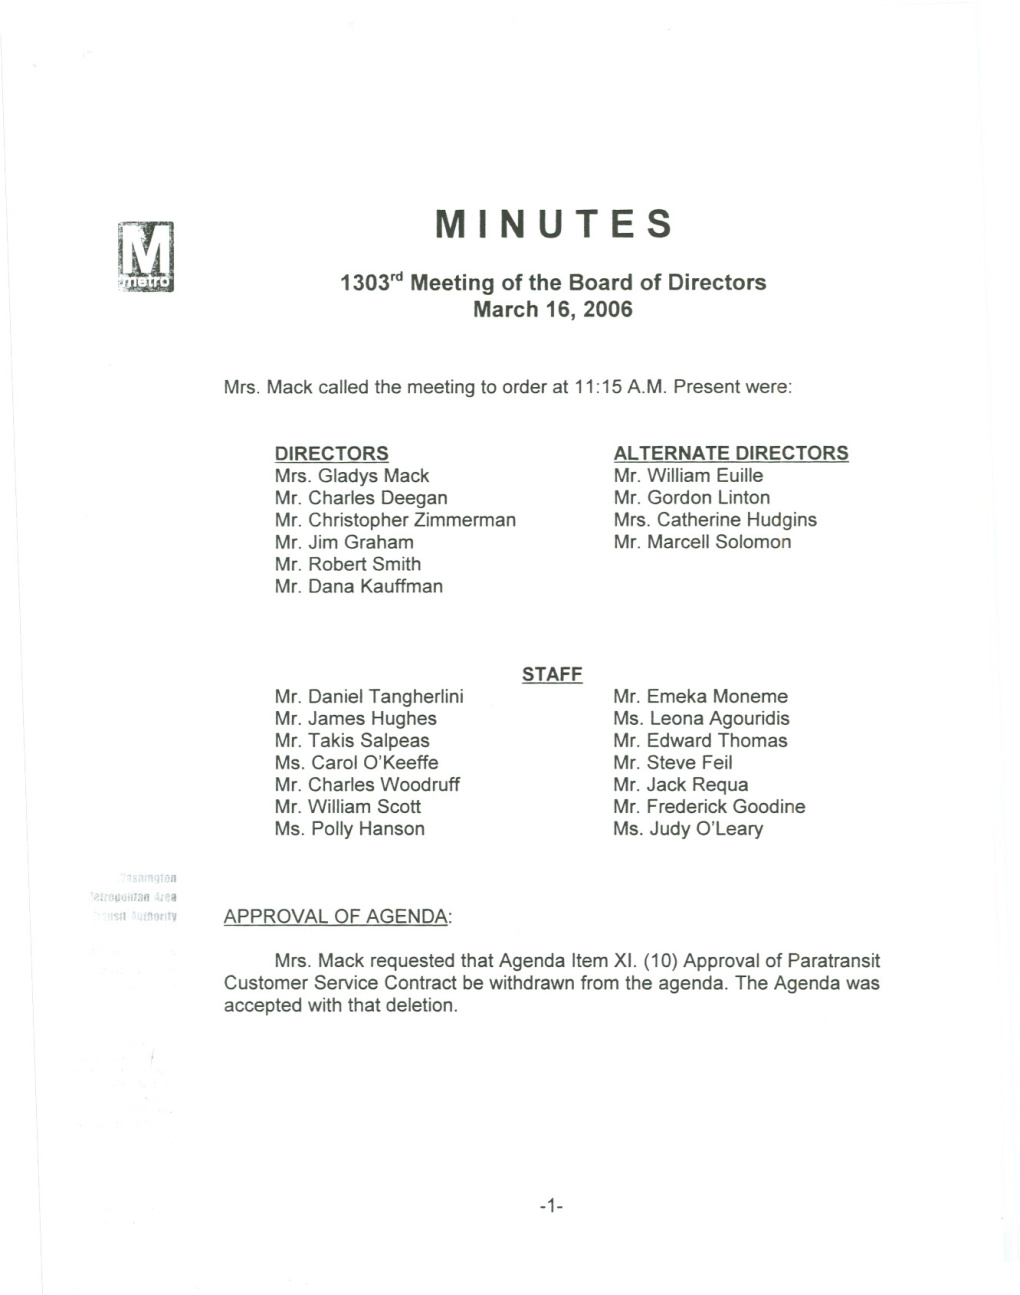 III. Approval of Minutes of March 16, 2006